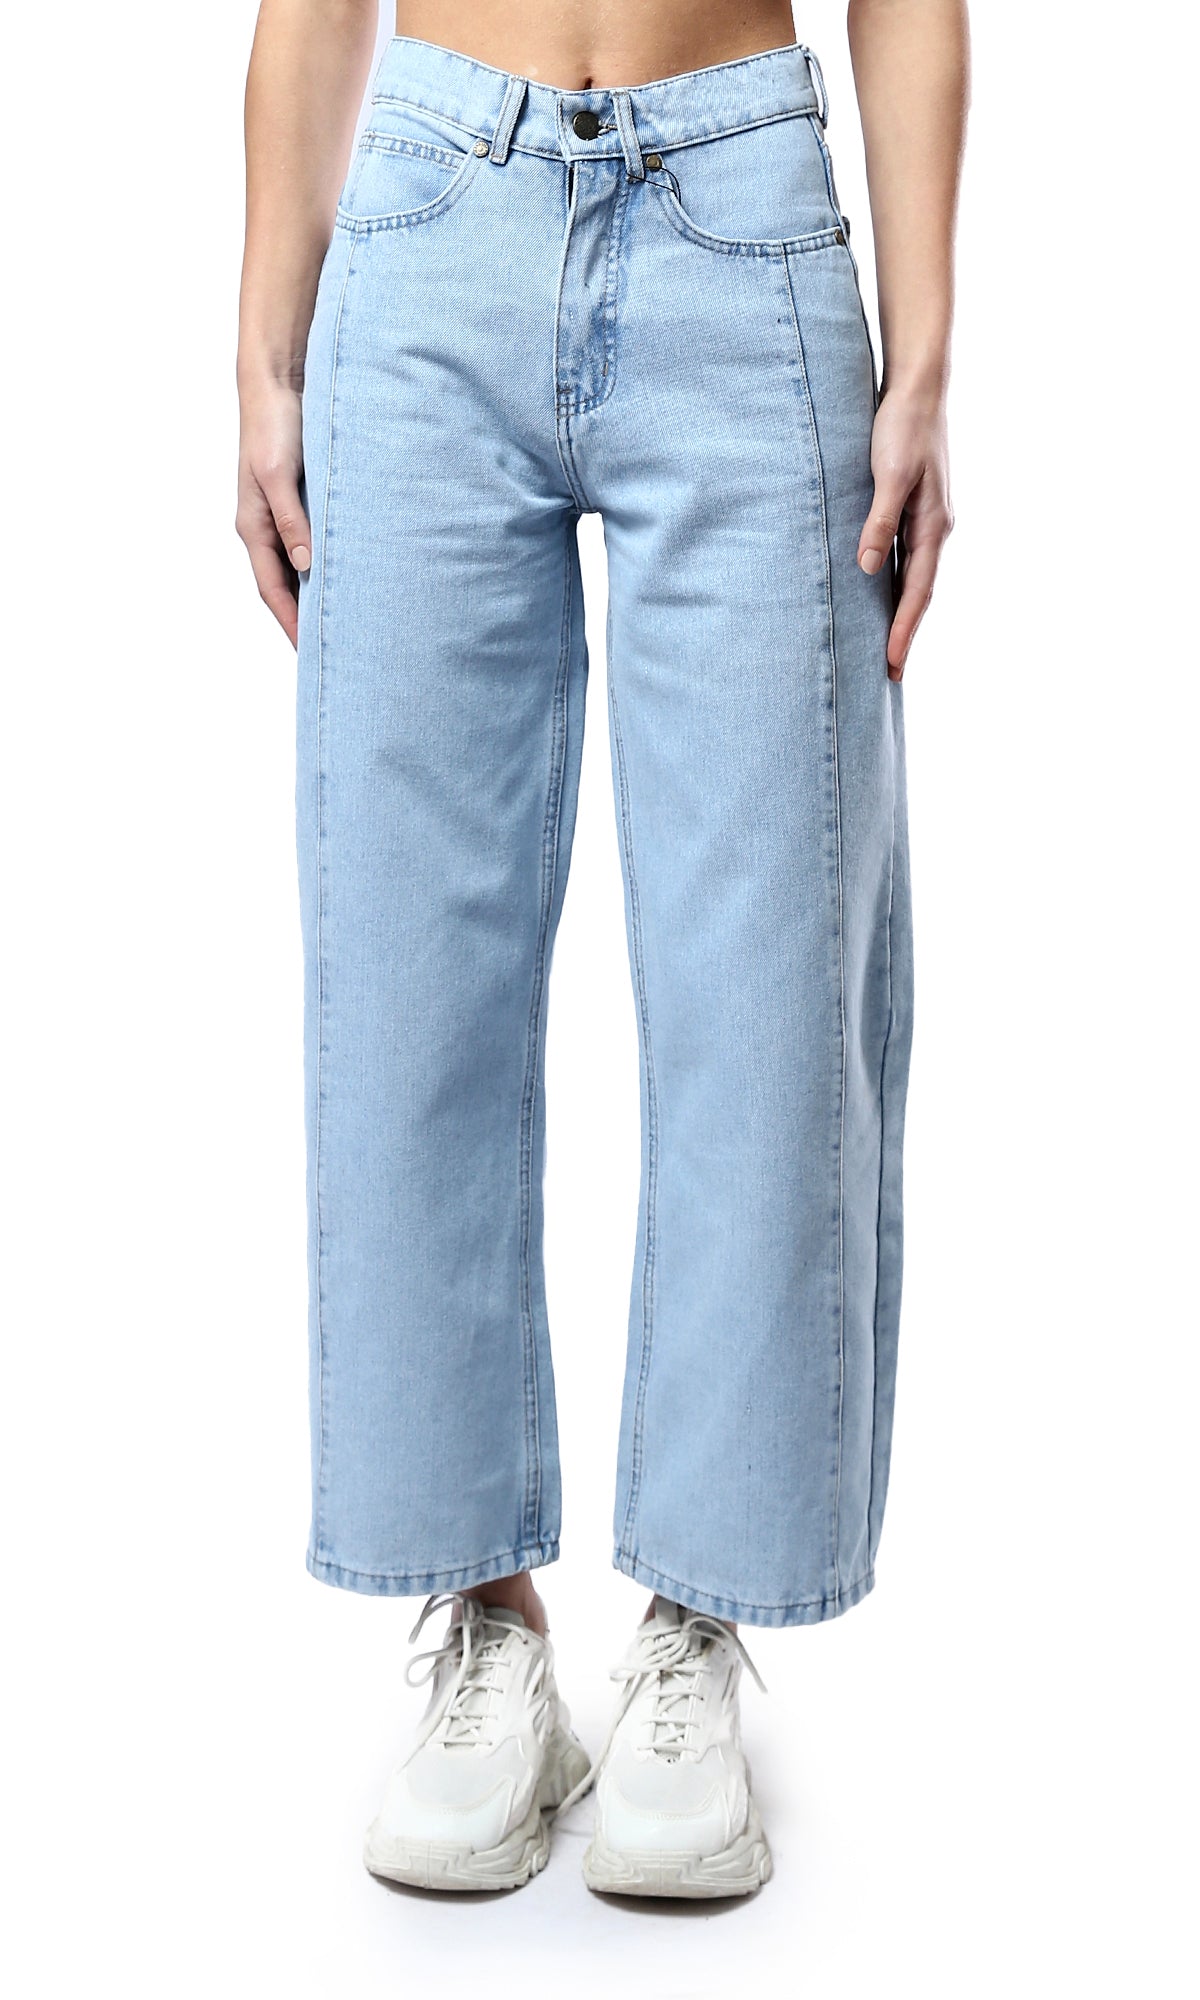 O177956 Fashionable Solid Light Blue Casual Wide Jeans